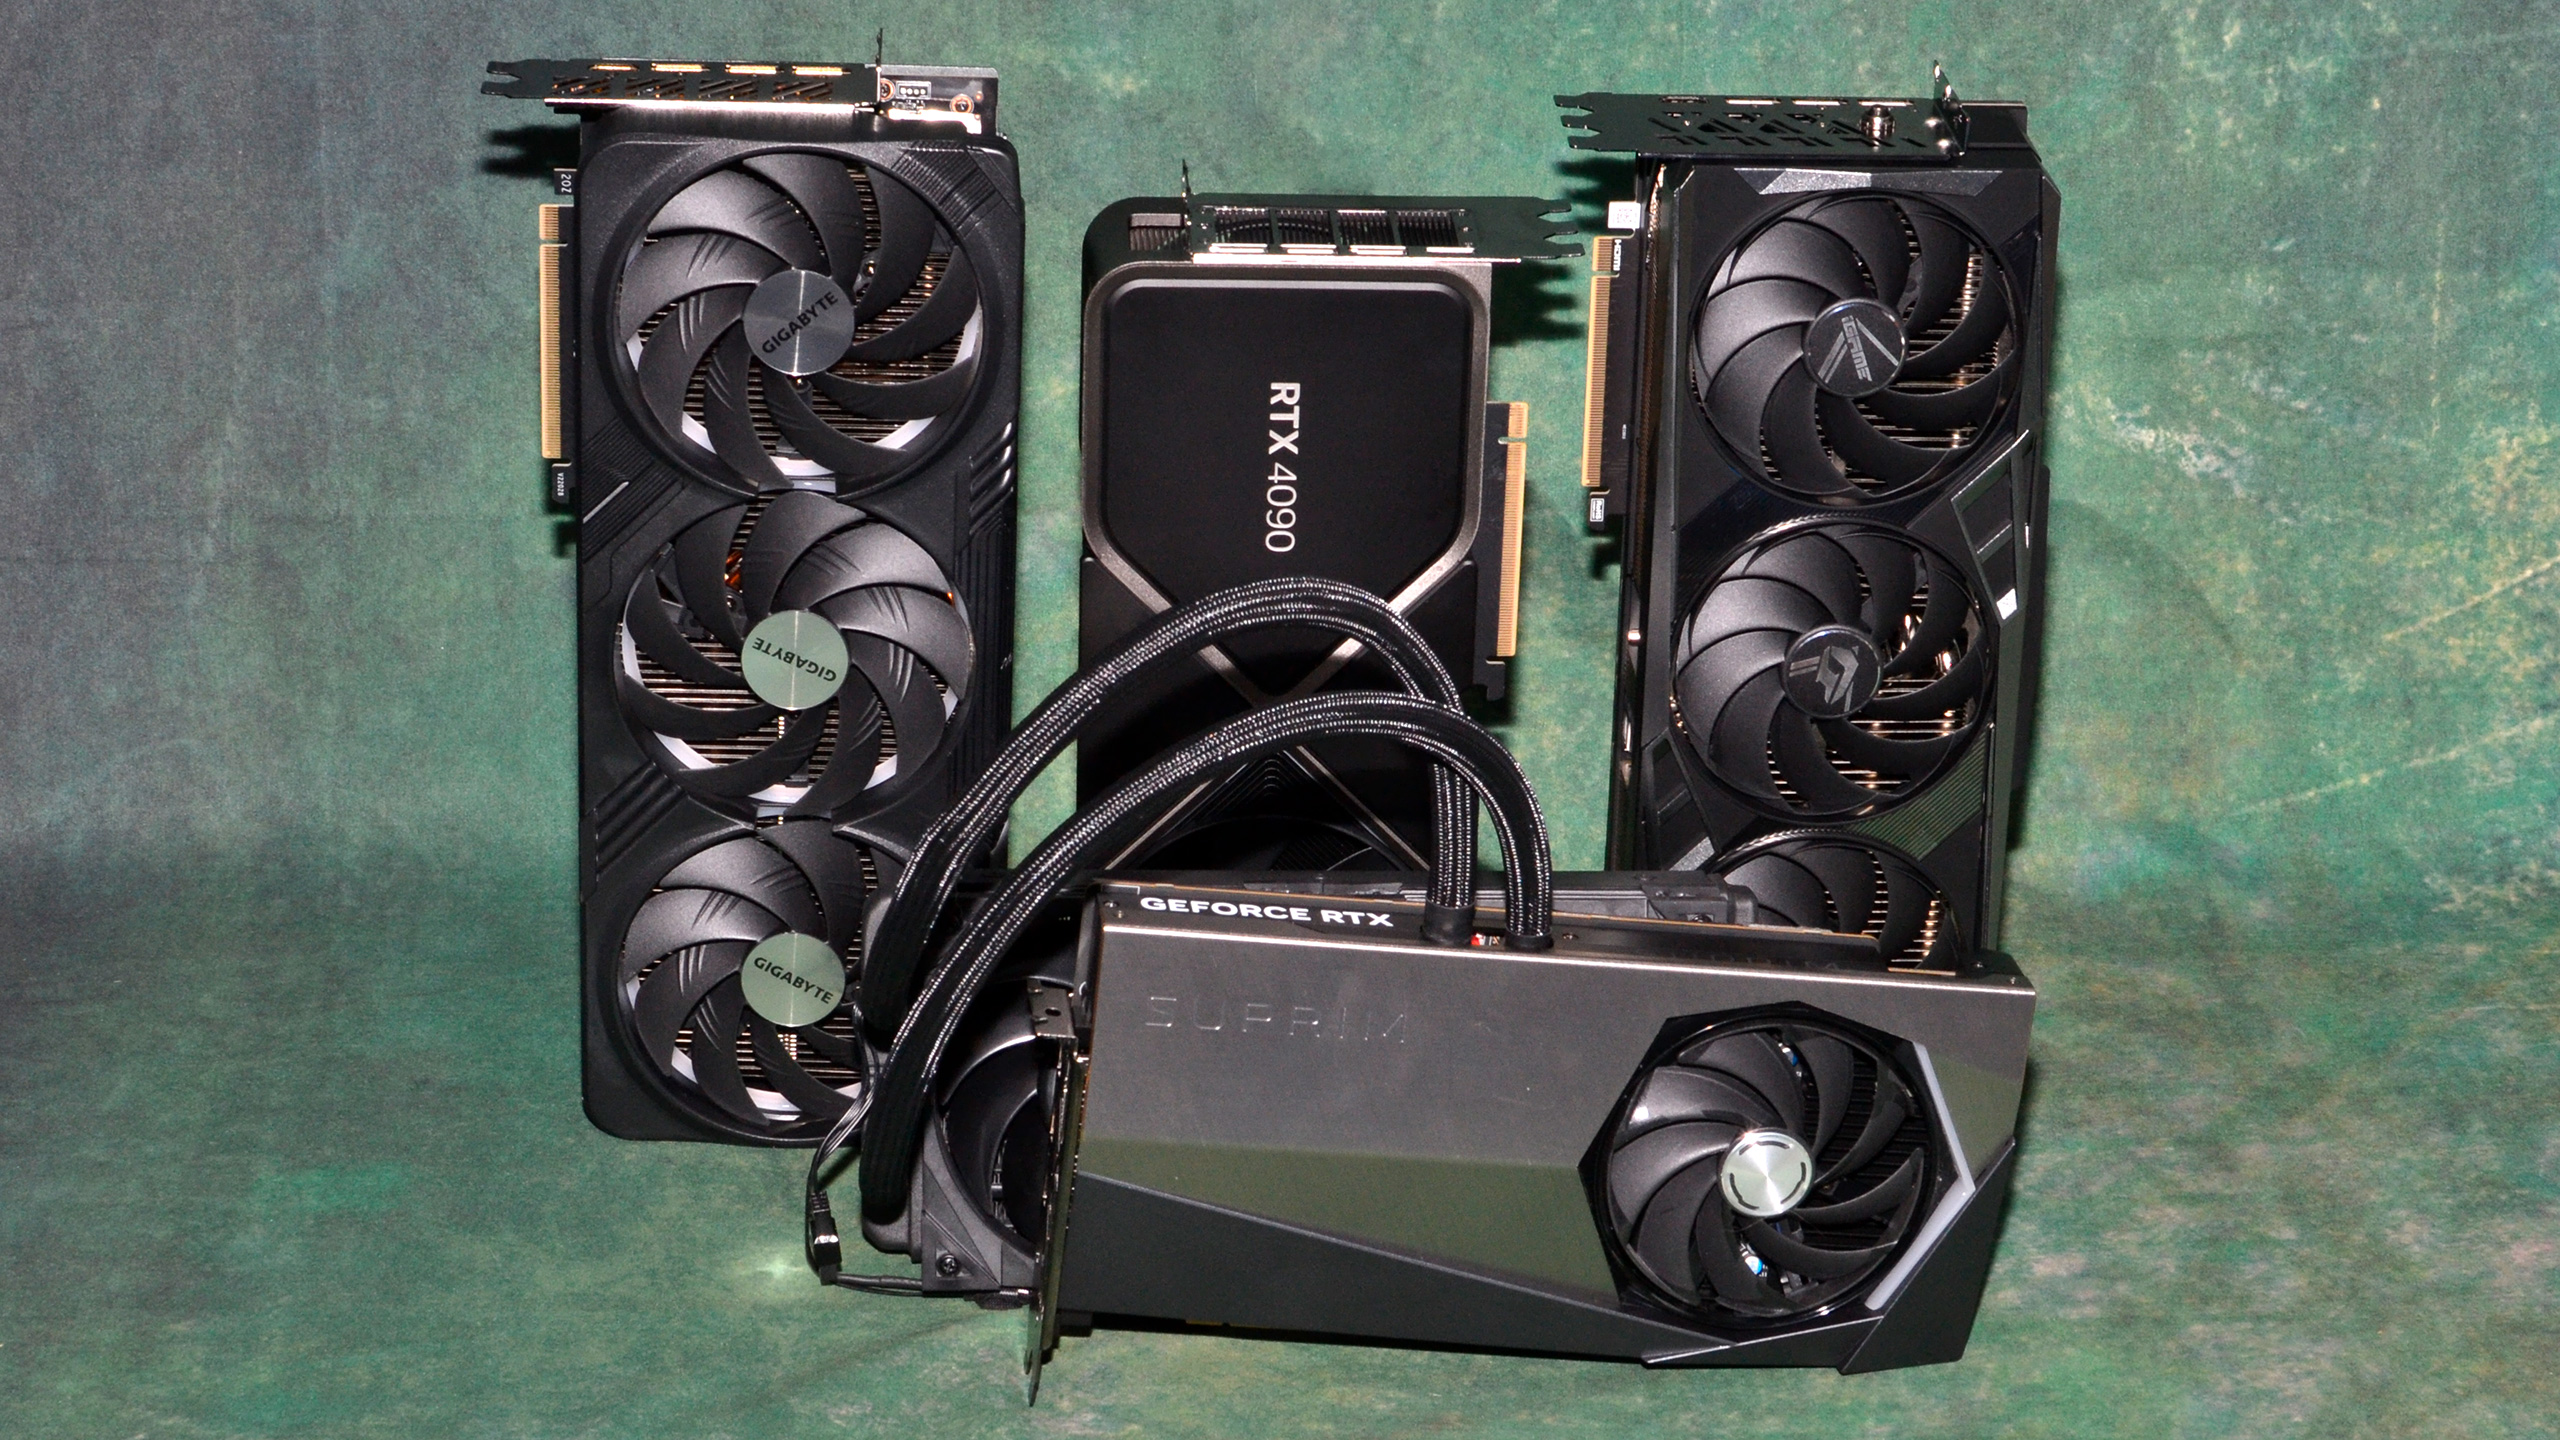 Nvidia GeForce RTX 4090 graphics cards